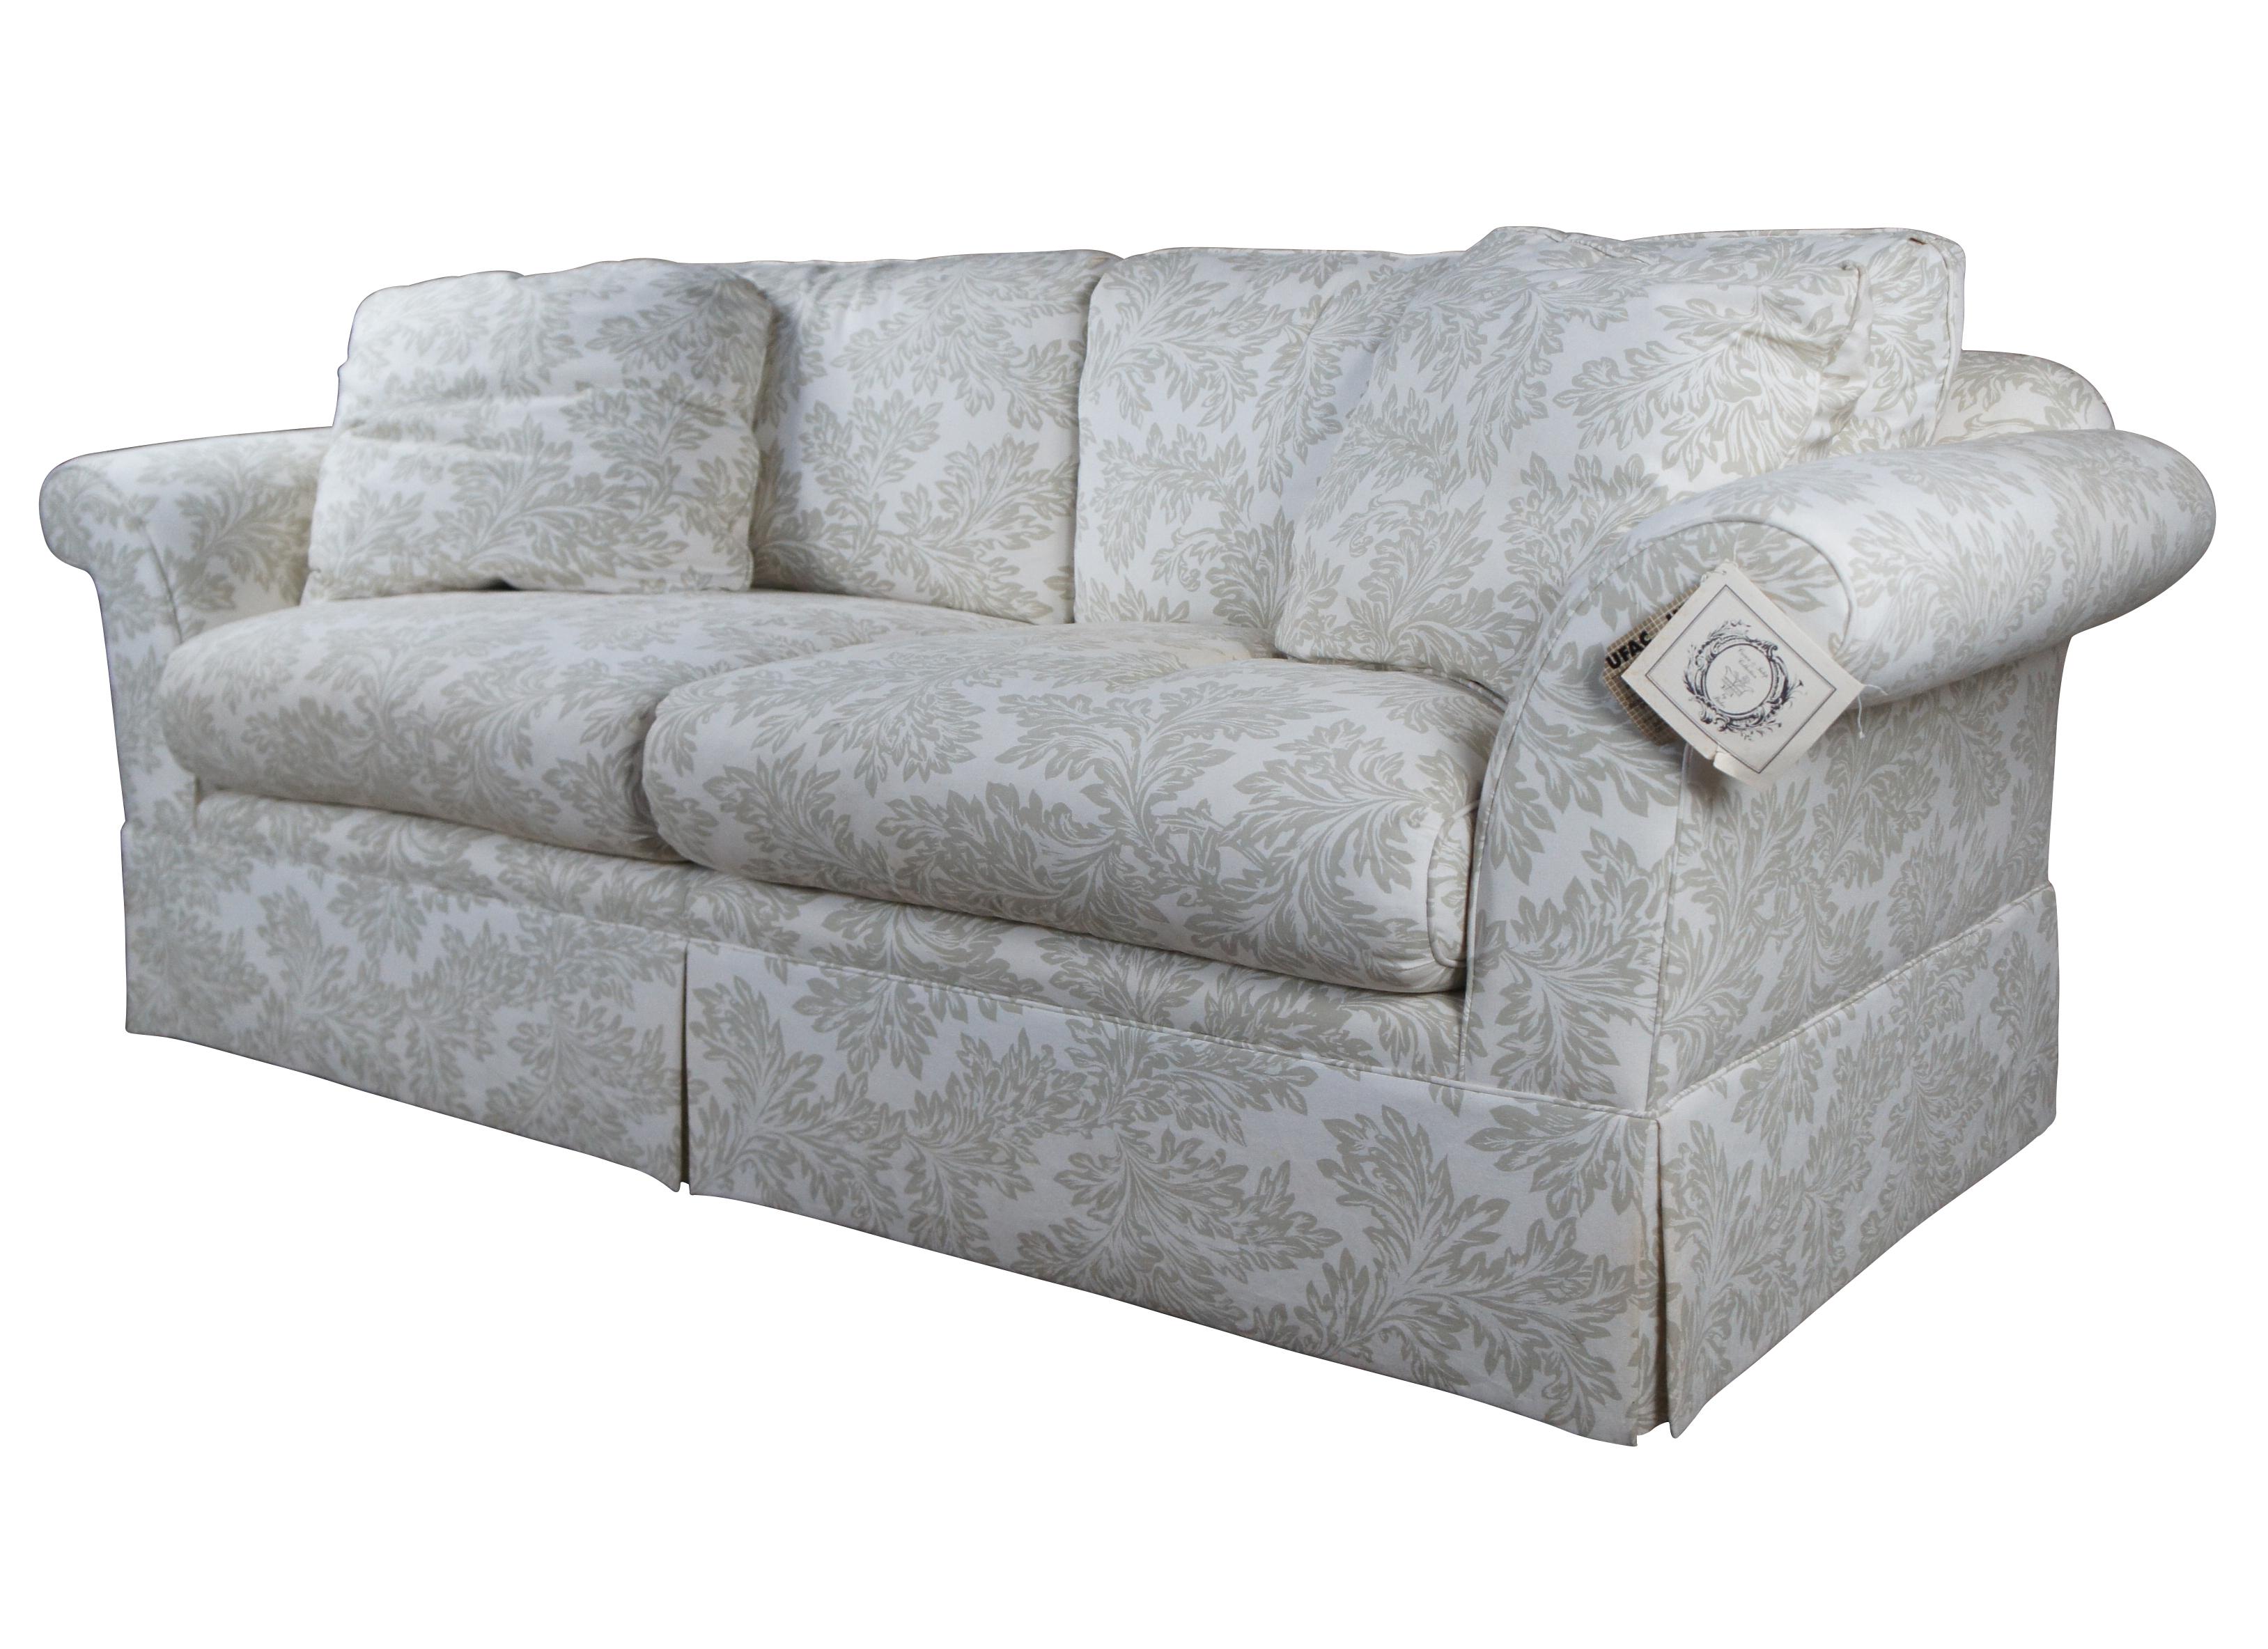 Vintage Baker Crown & Tulip Collection Sofa, circa last quarter 20th century. Features a rectangular form with rolled arms, down filled cushions and throw pillows. #6819-88C. Upholstered in an off-white fabric with olive green / acanthus design.